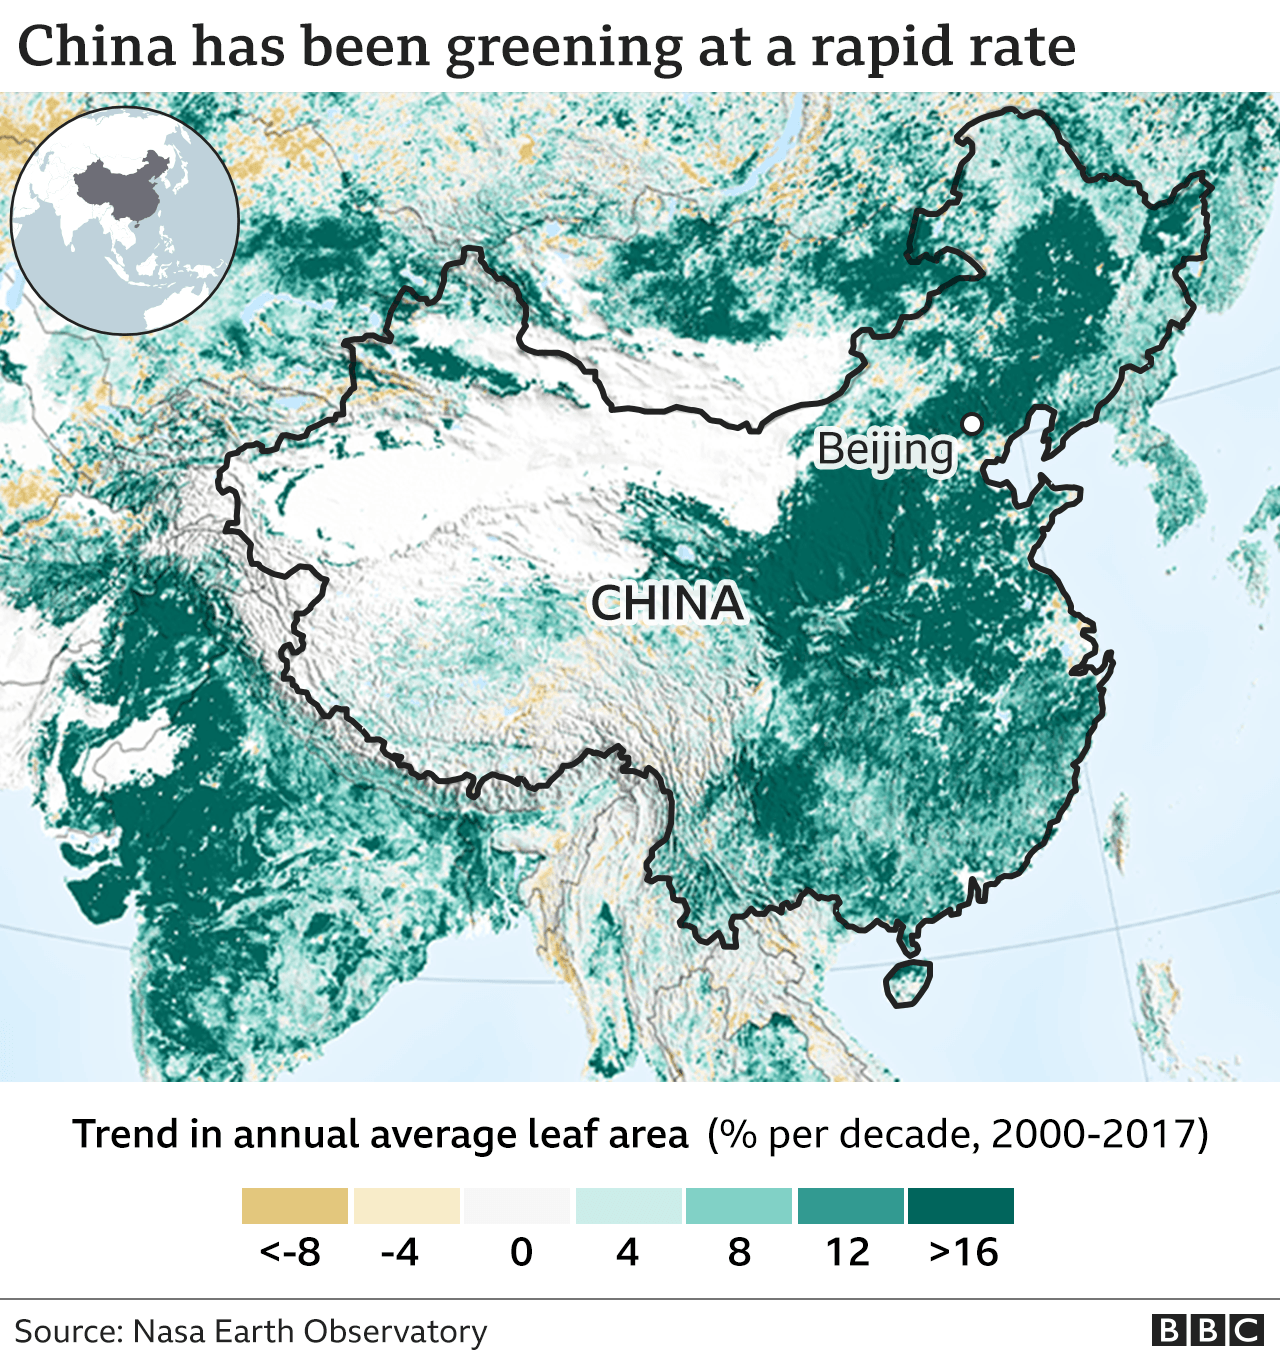 Map showing China greening at a rapid rate.